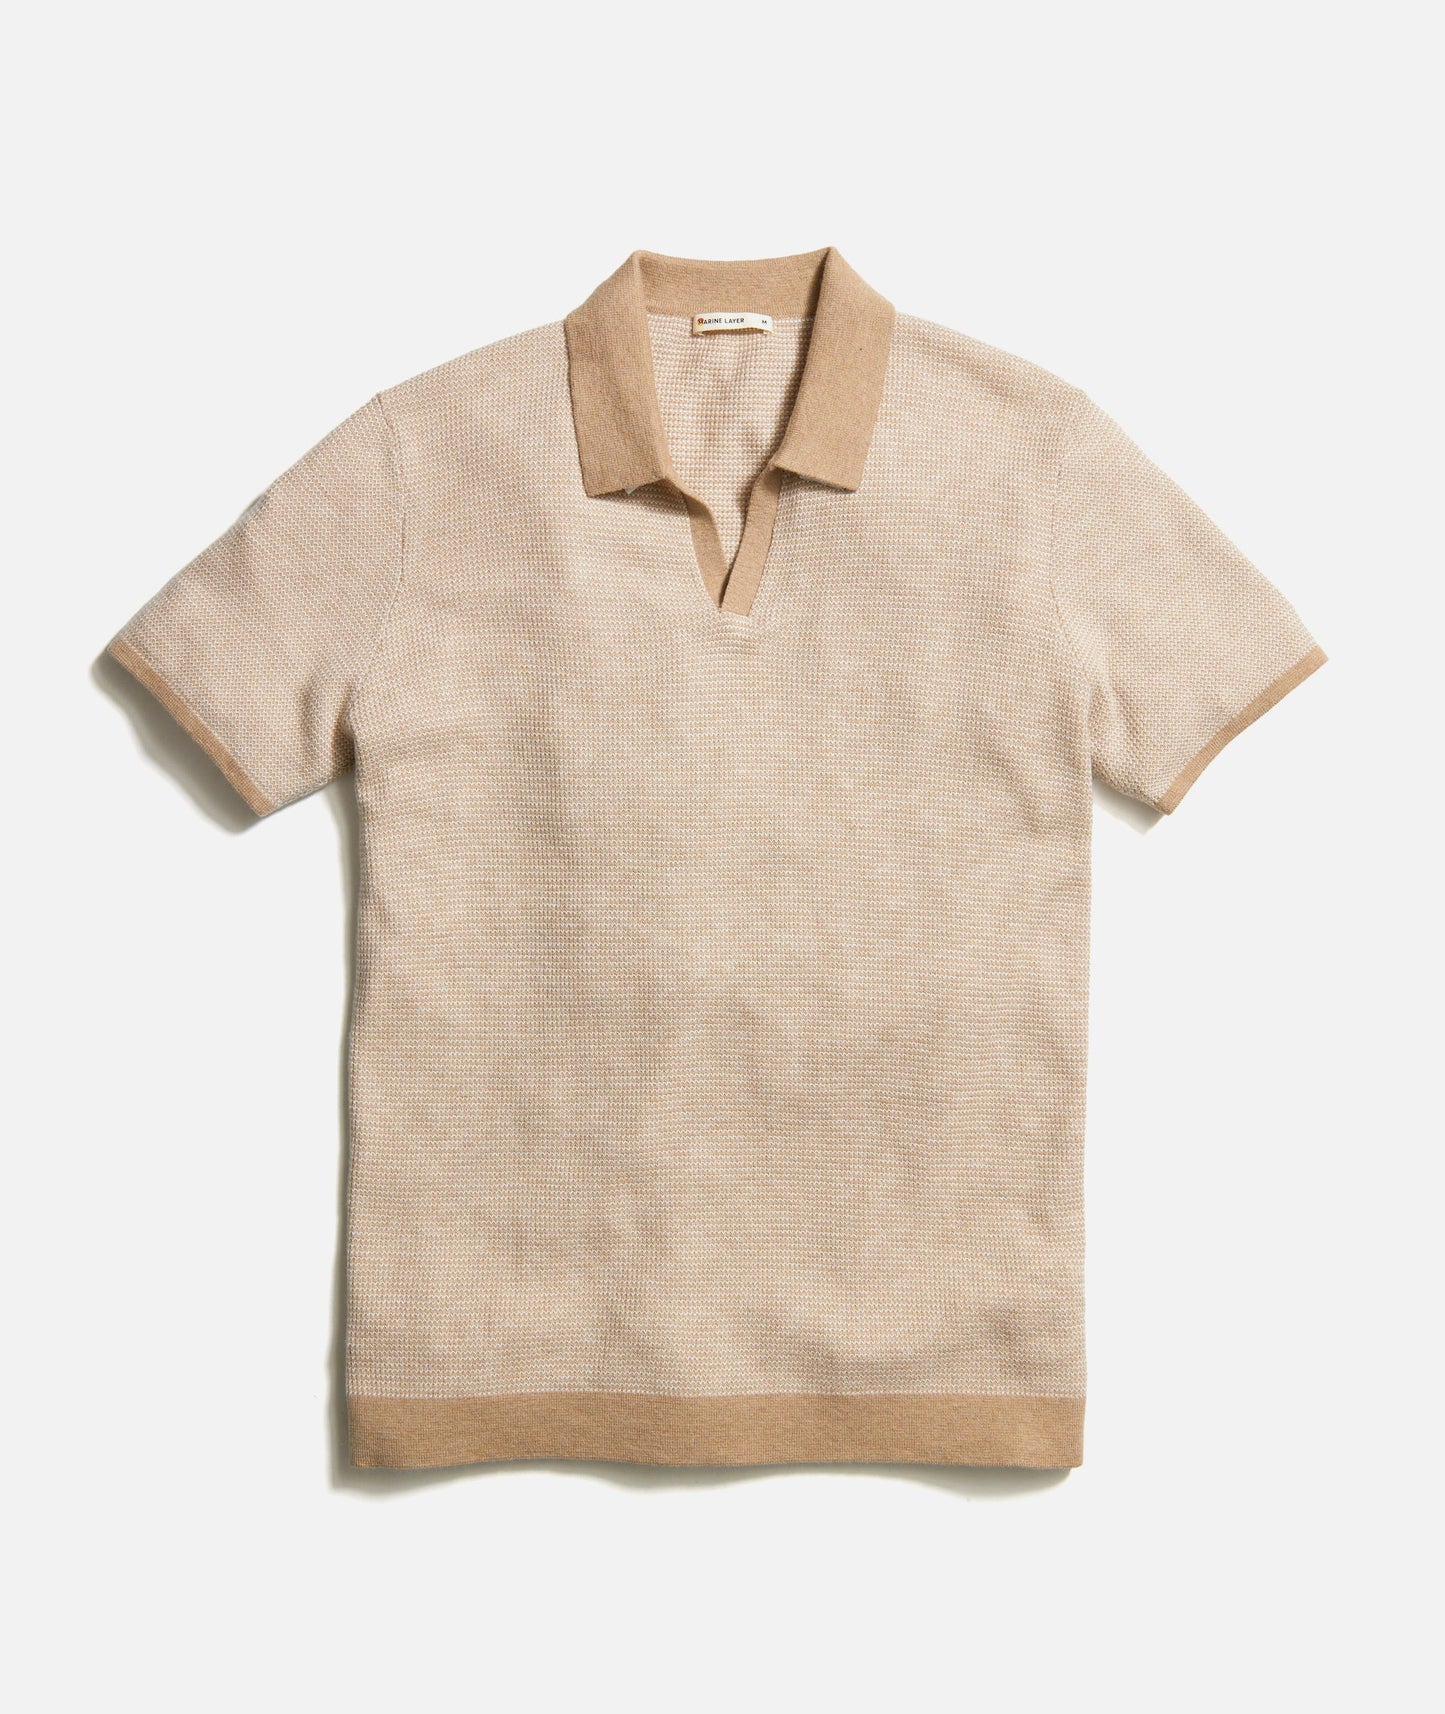 MARINE LAYER LIAM SWEATER POLO IN SABLE AND IVORY